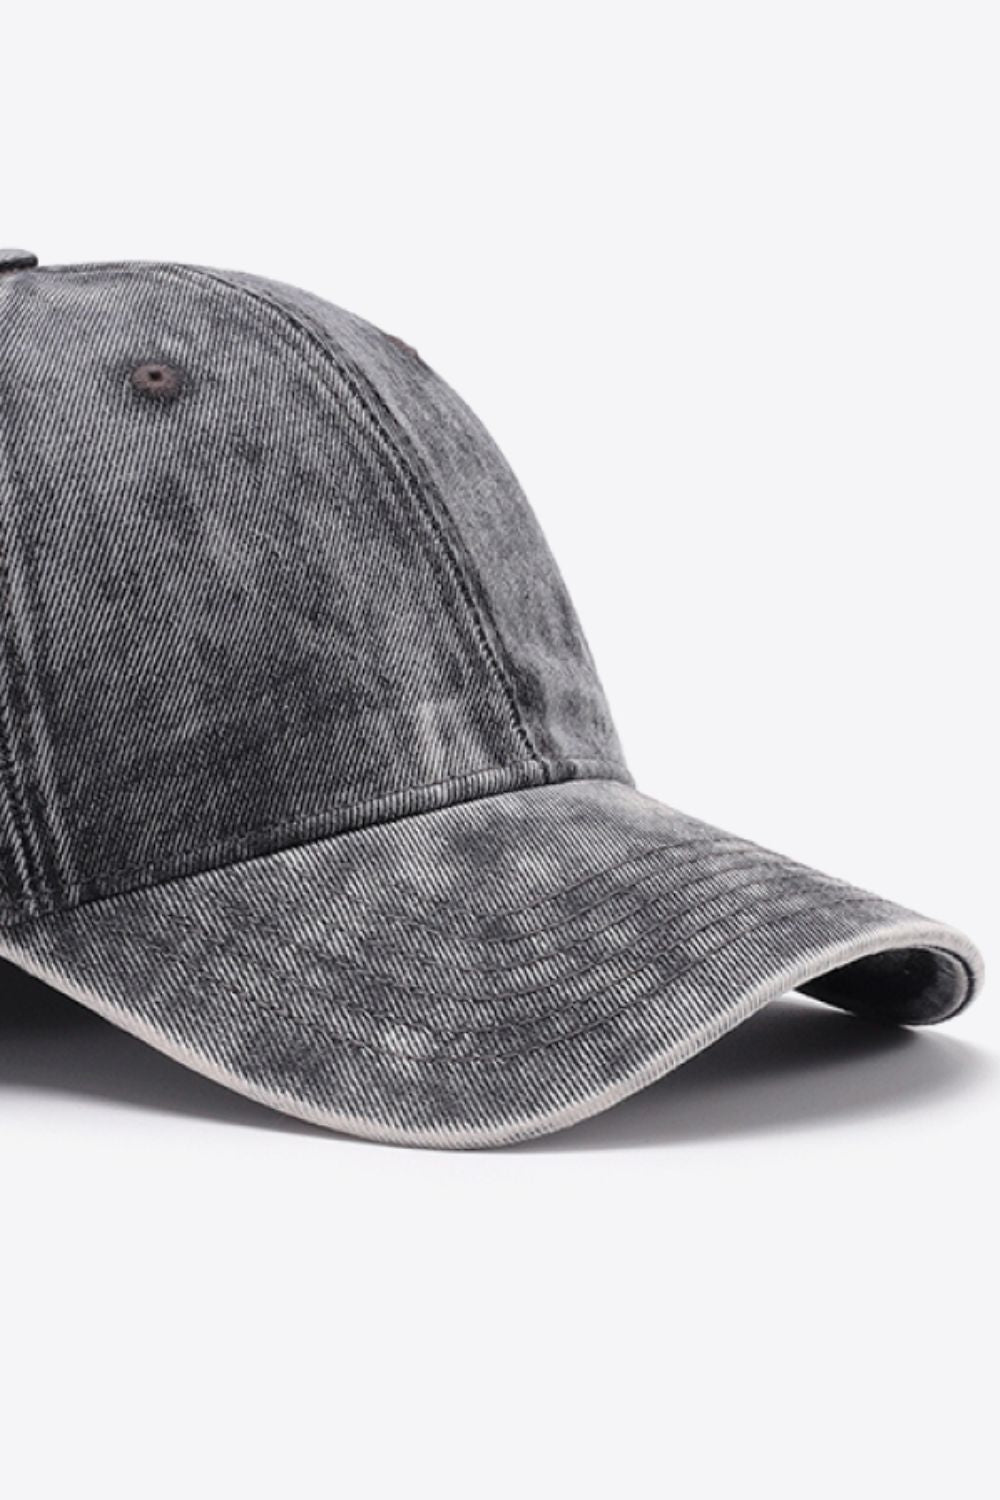 Villa Blvd Washed Baseball Hat ☛ Multiple Colors Available ☚